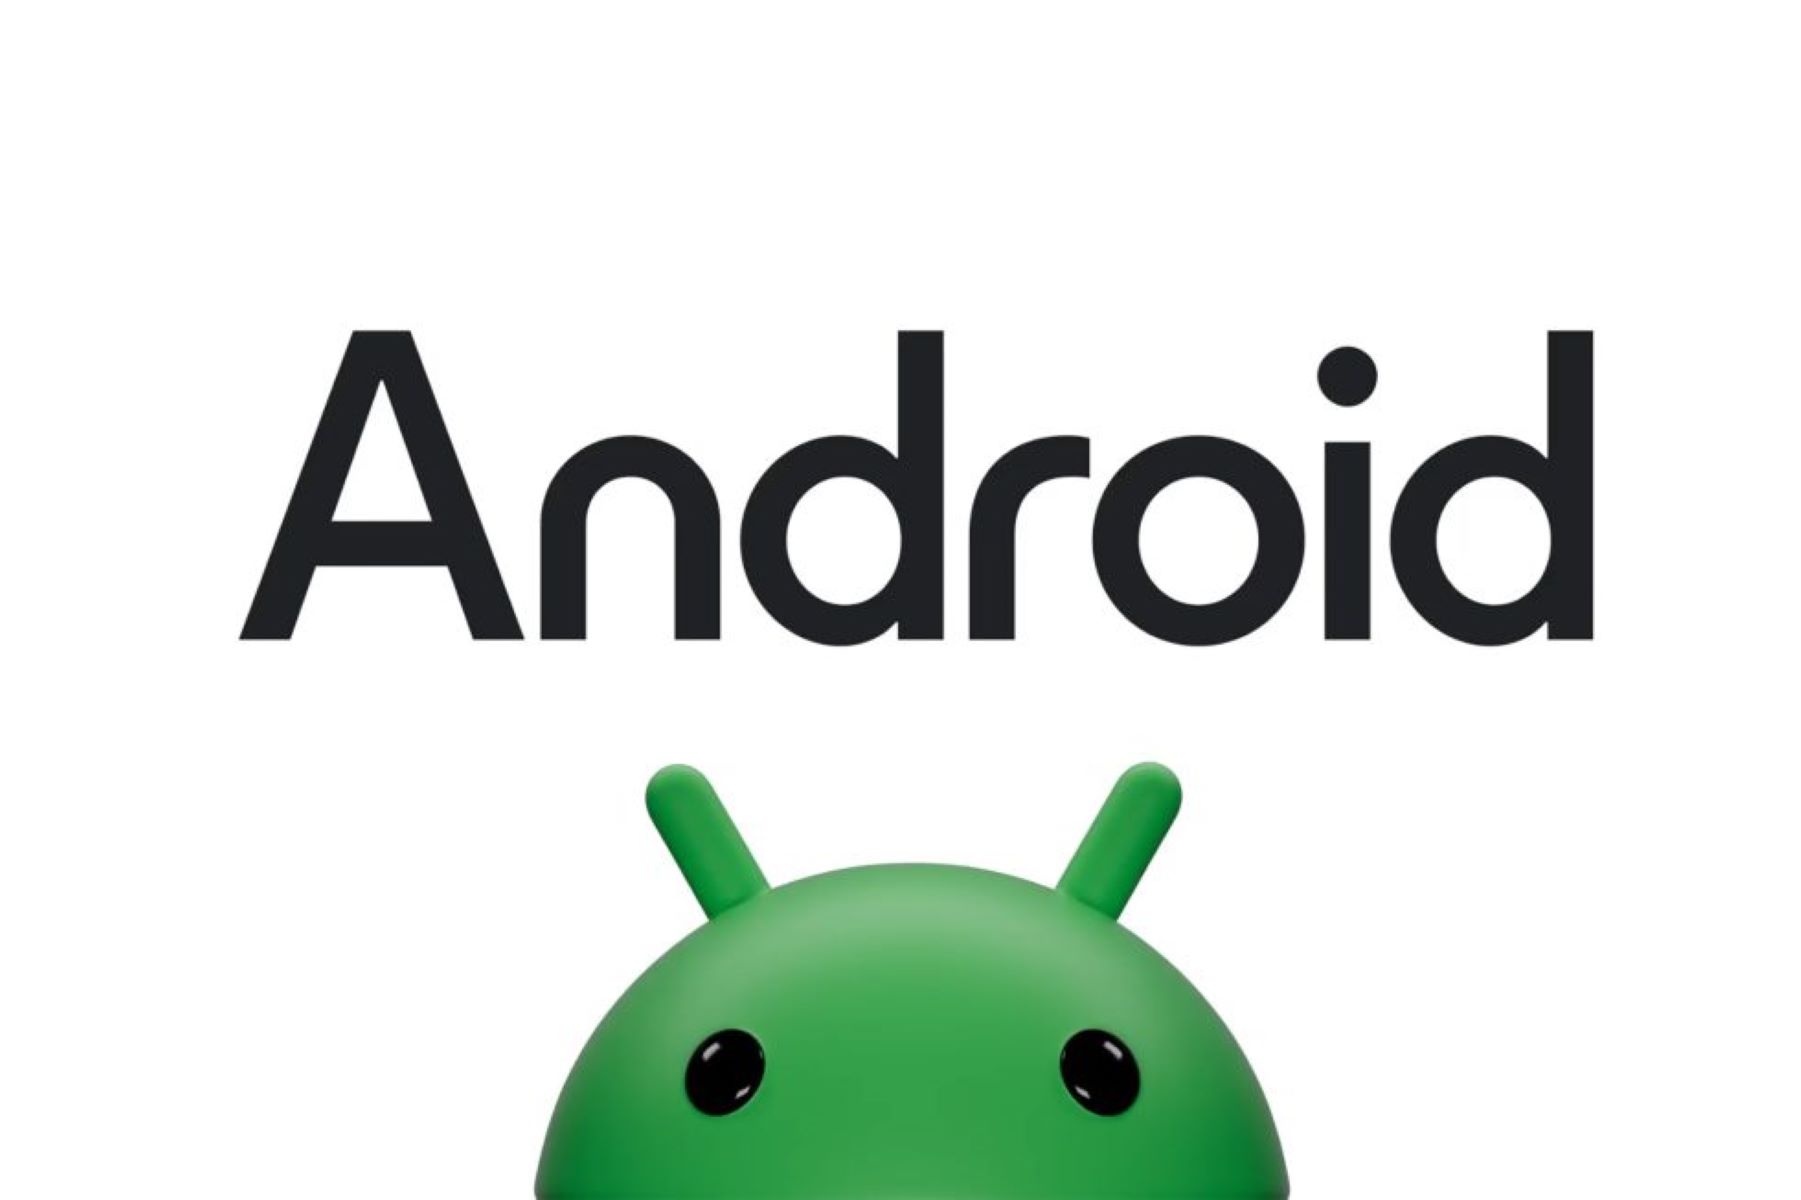 Google Introduces New 3D Logo and Branding for Android